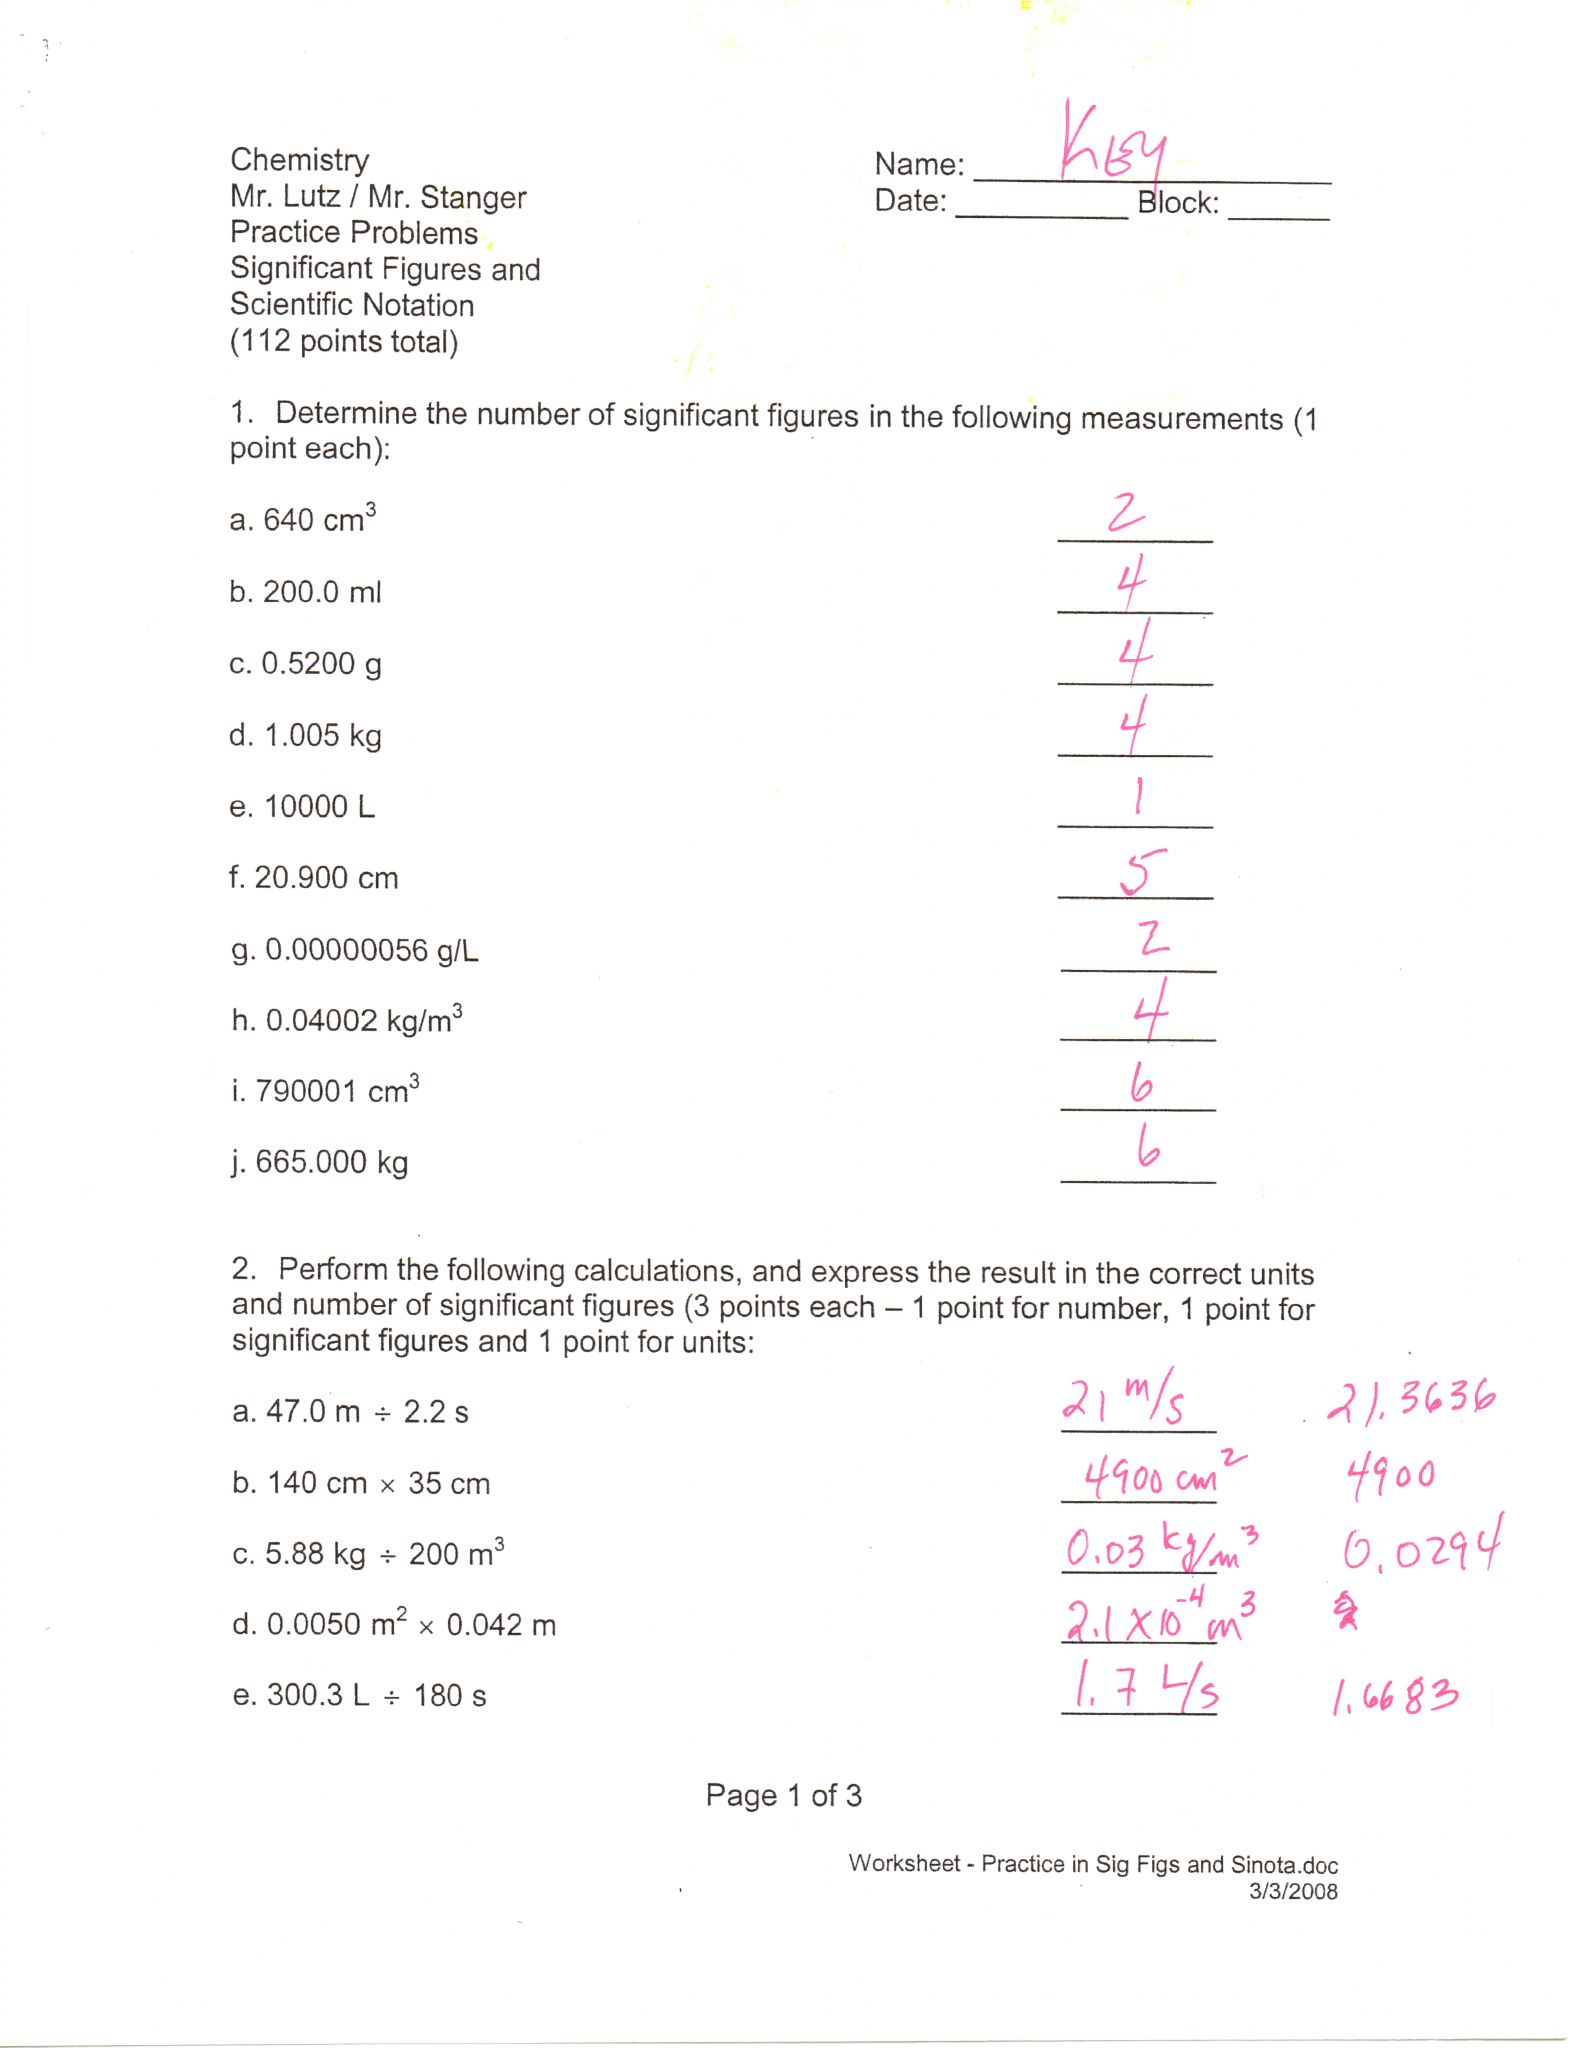 worksheet-2-scientific-notation-answers-db-excel